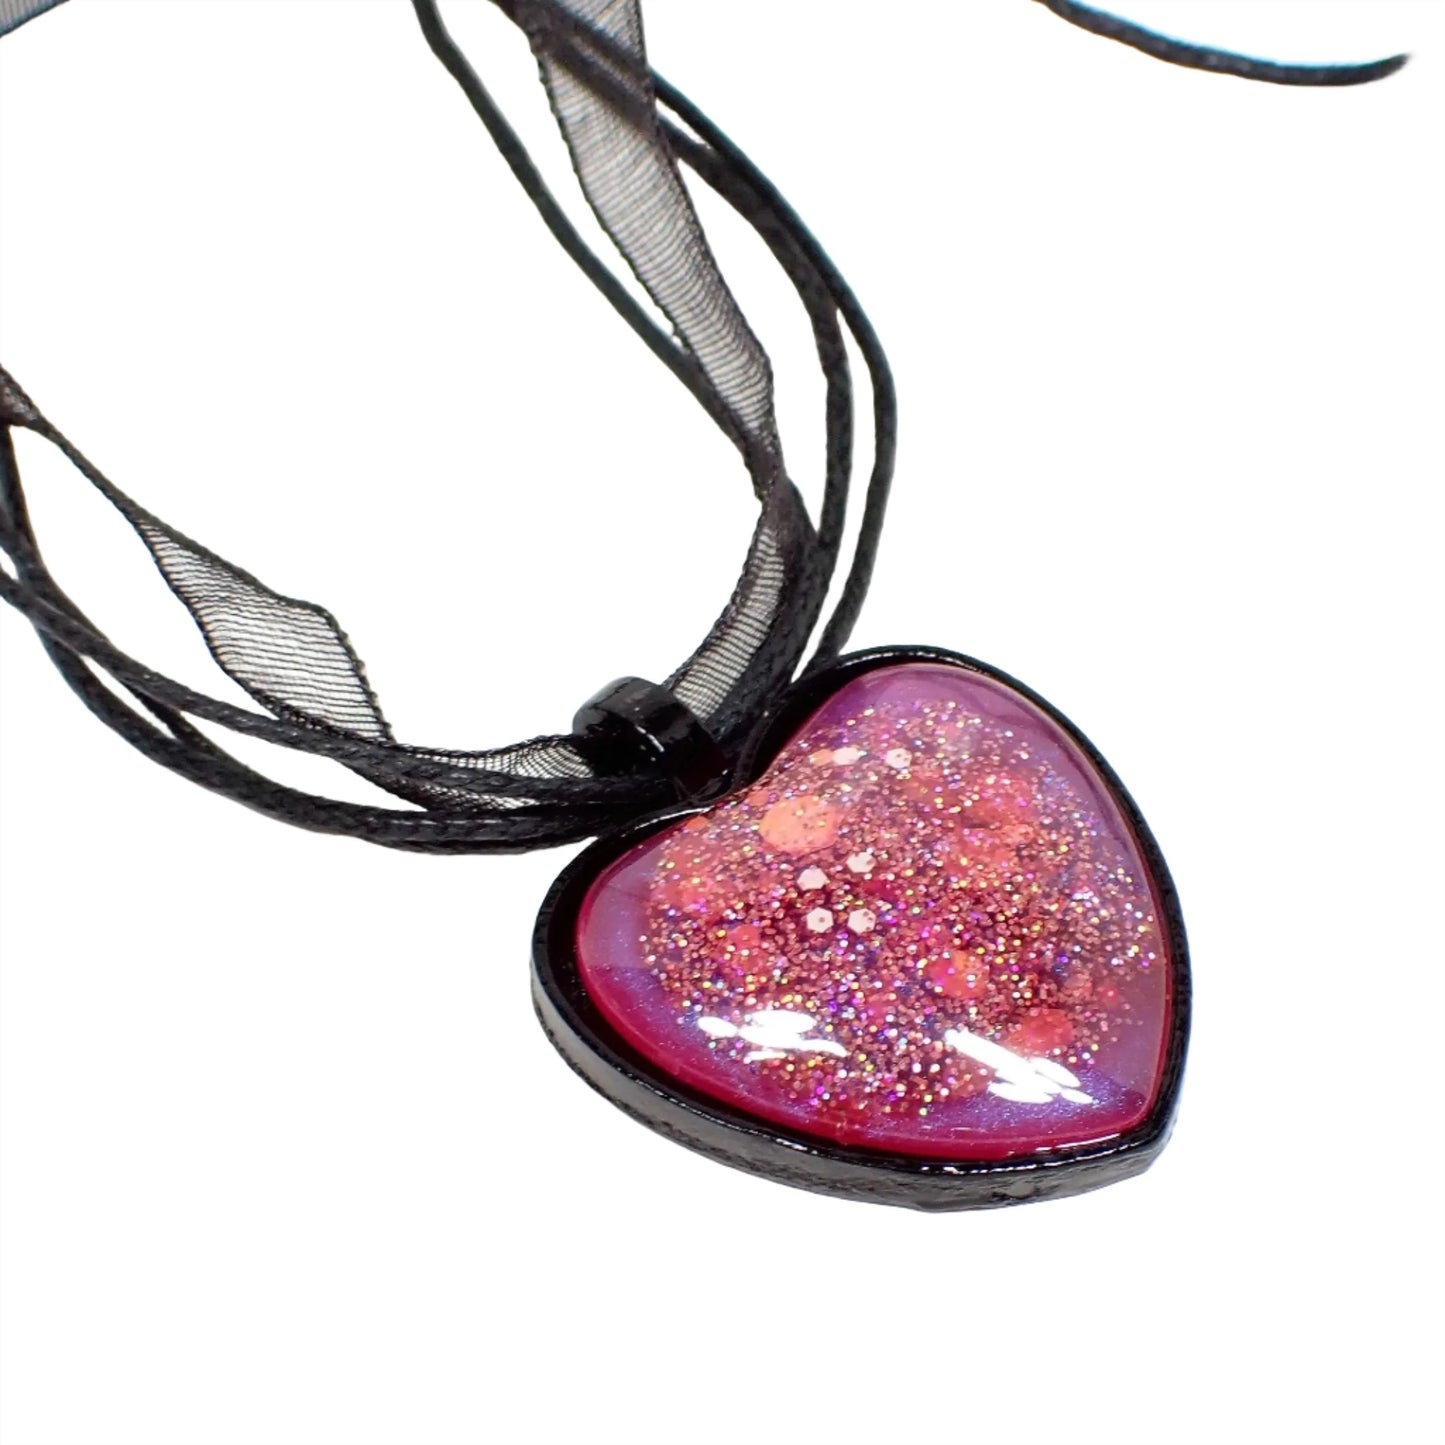 Enlarged view of the handmade black heart Goth pendant necklace. The necklace has three strands of faux leather cord and a strand of organza ribbon. The heart has black coated metal with a resin cab. The resin is bright pearly pink with hints of purple and chunky iridescent pink glitter.